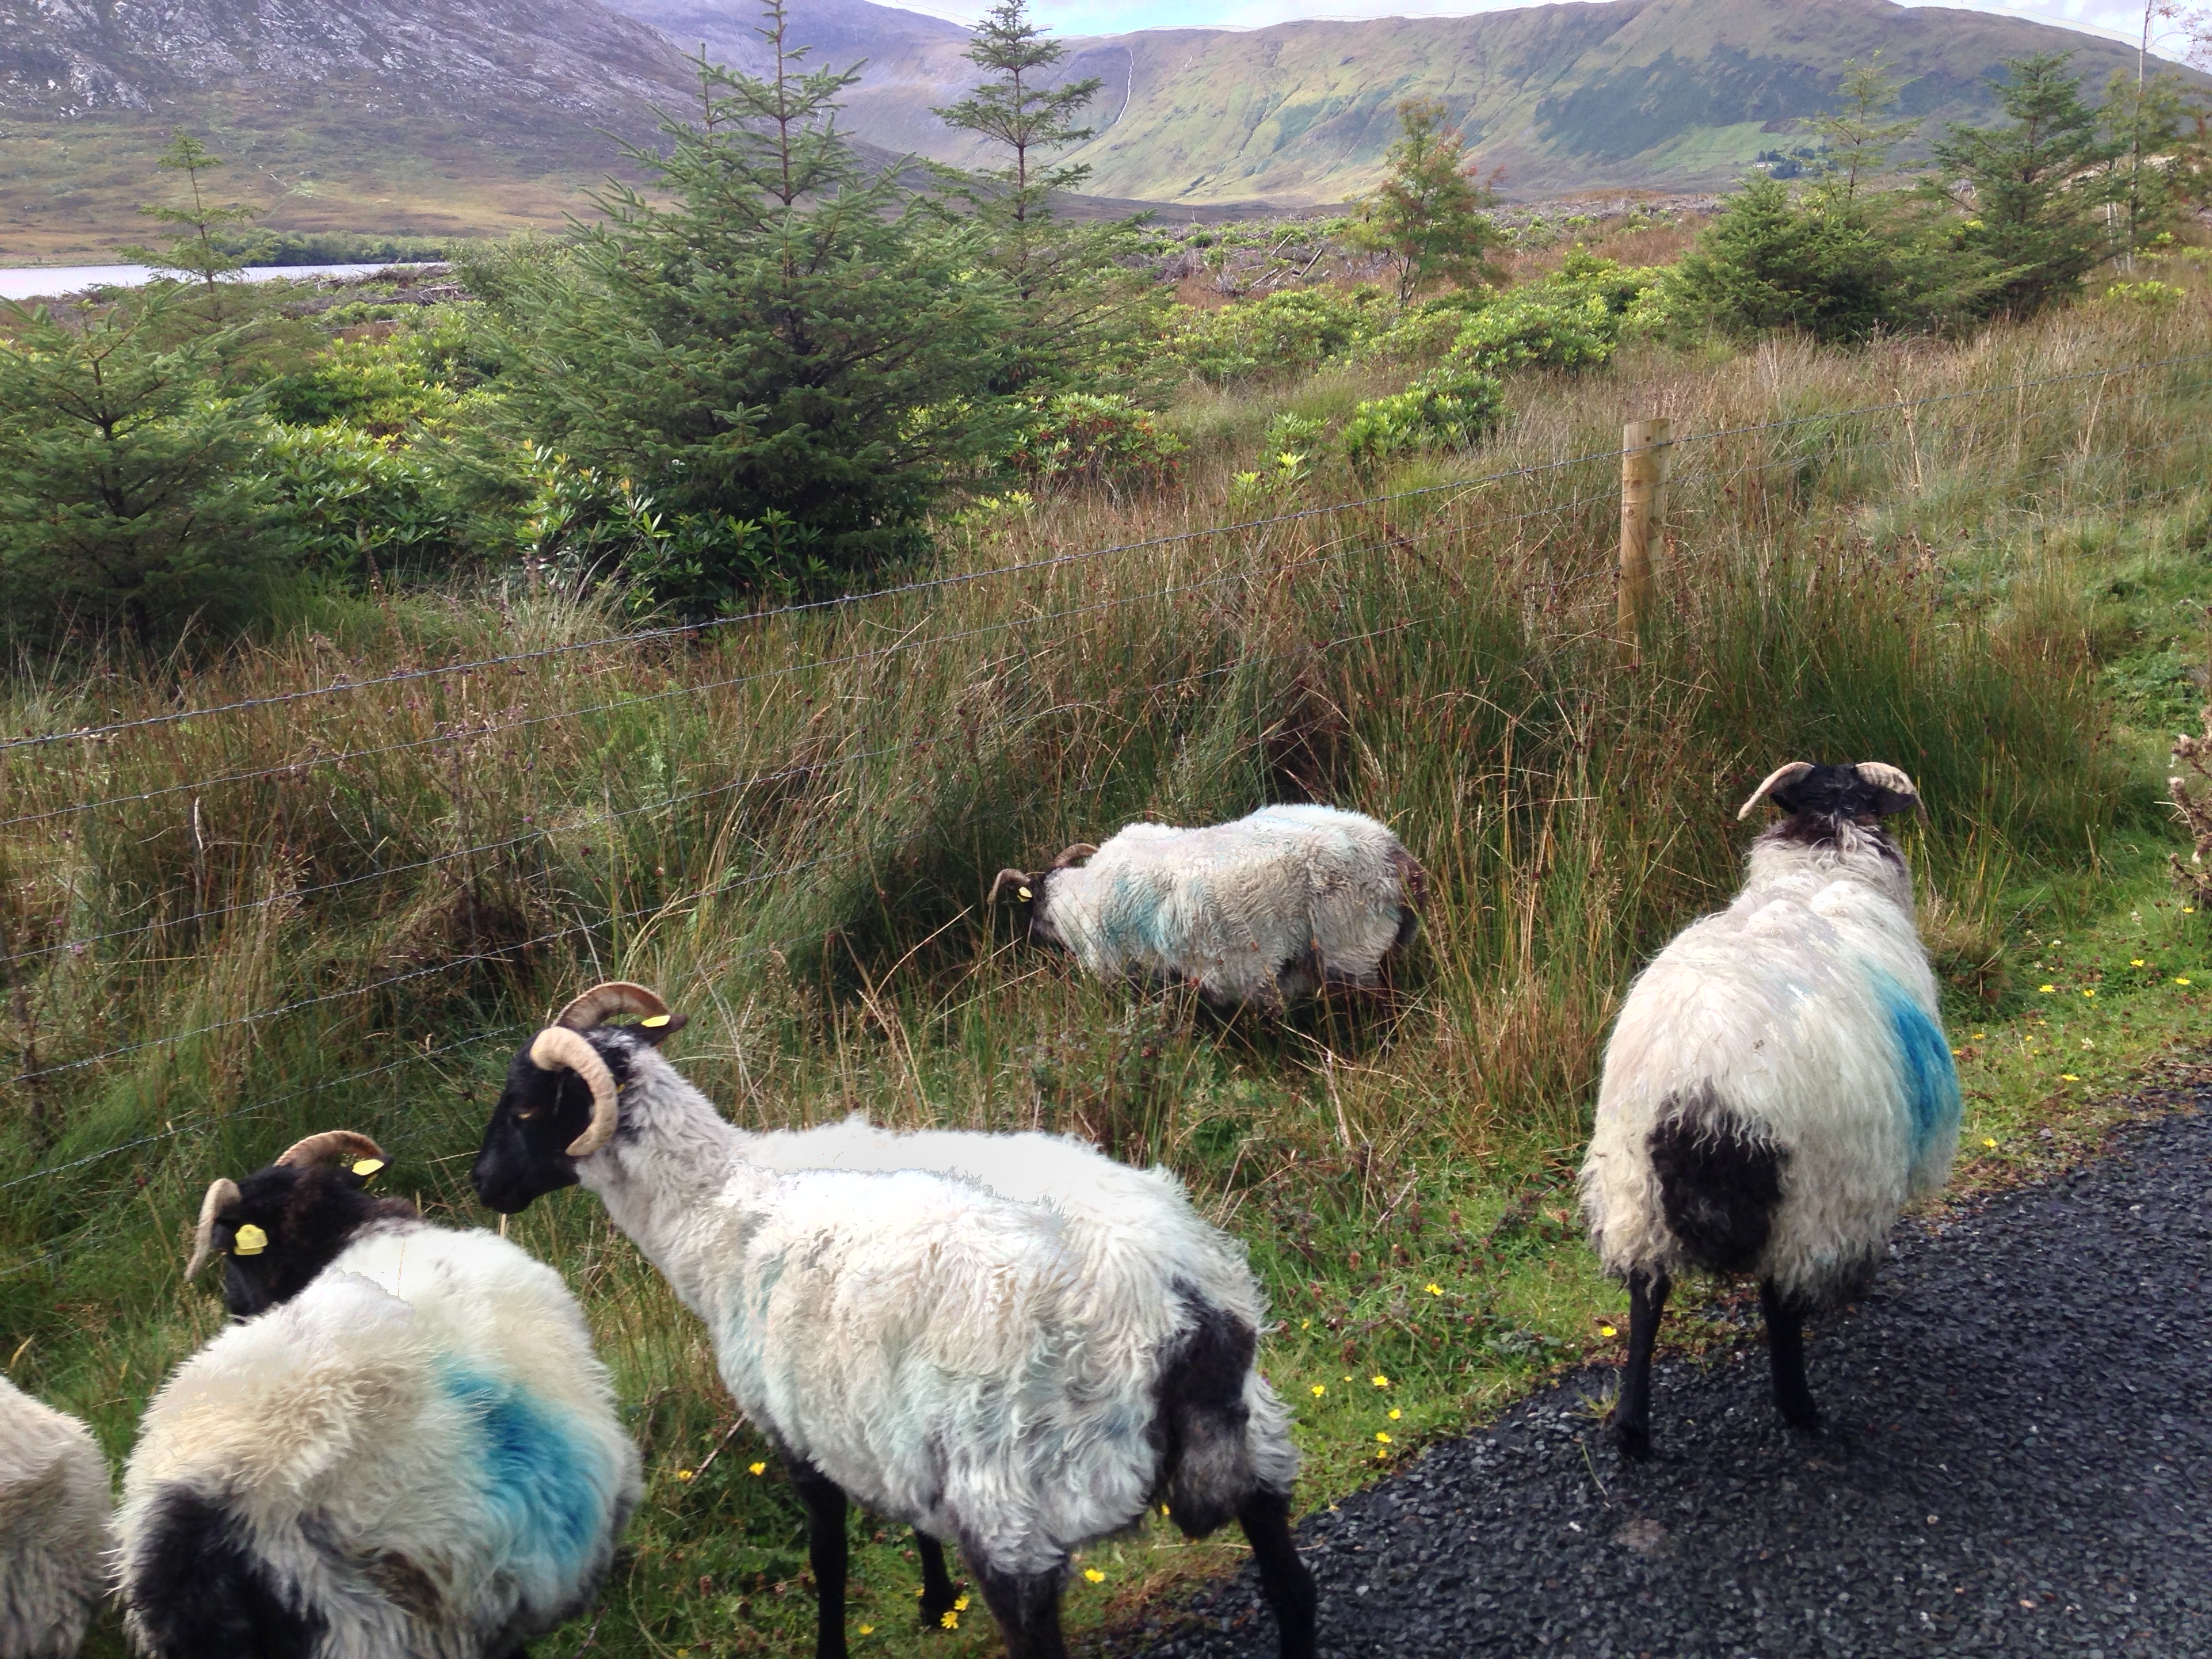 Sheep on a road of Ireland